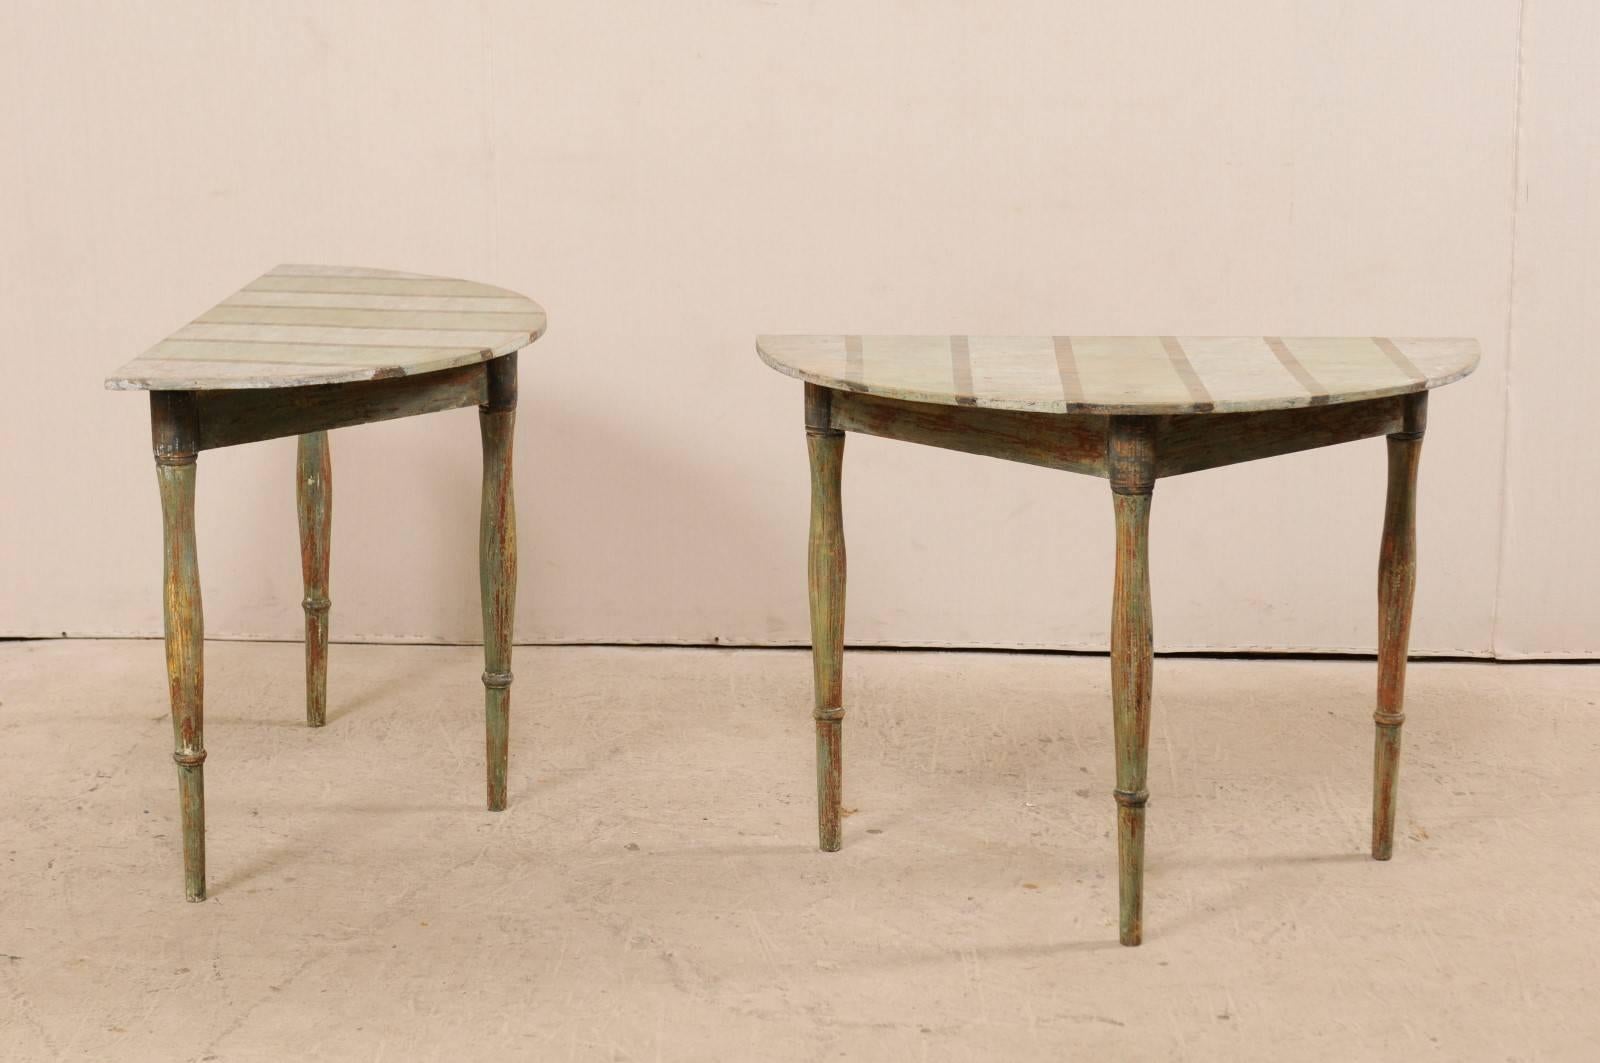 Pair of Swedish 19th Century Painted Wood Demilune Tables with Subtle Stripes 1